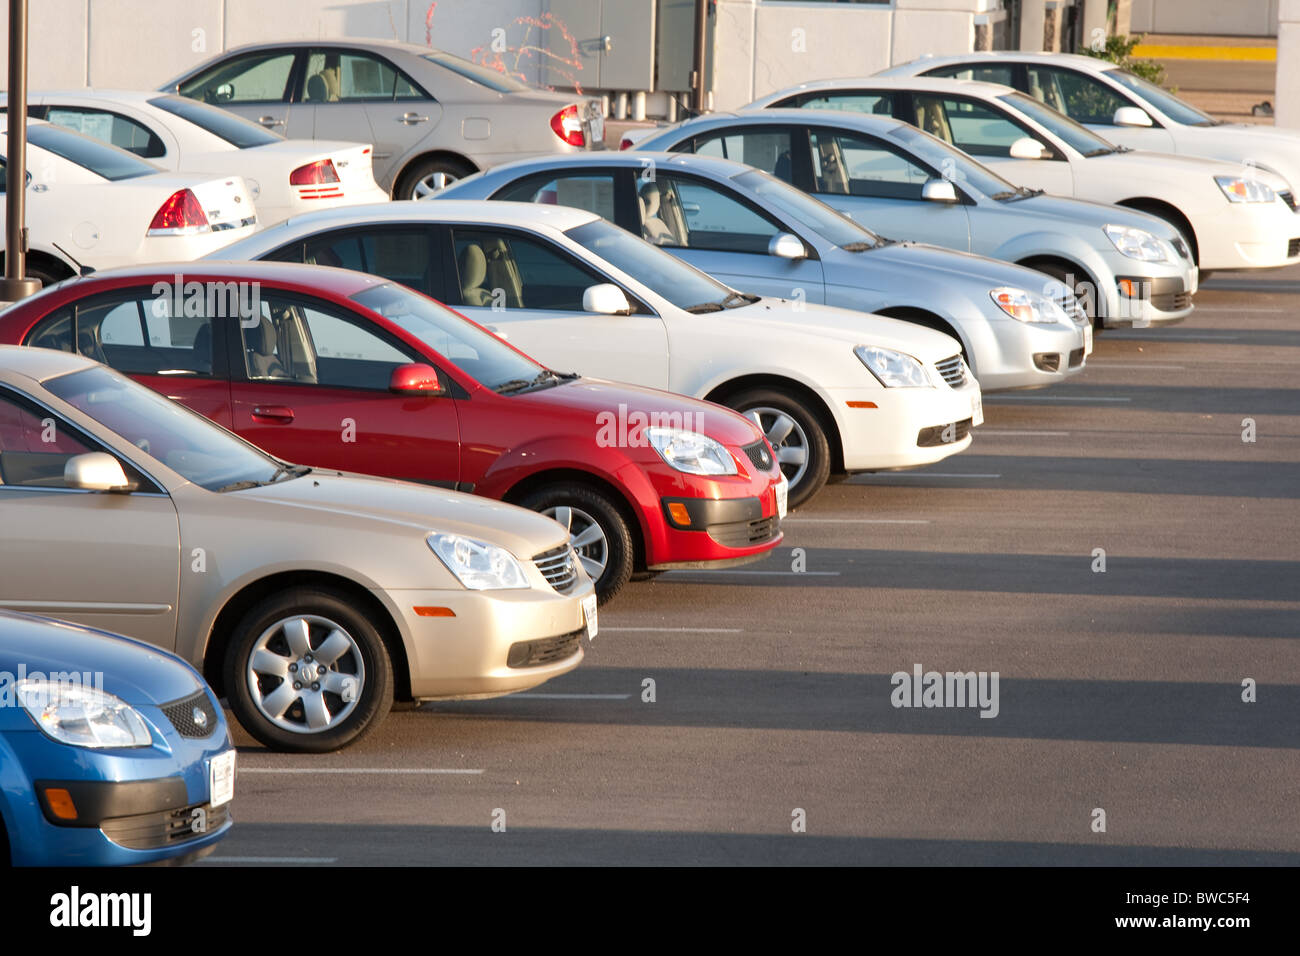 New cars, same model in different colors, on Chevrolet dealership's lot in San Angelo, Texas Stock Photo